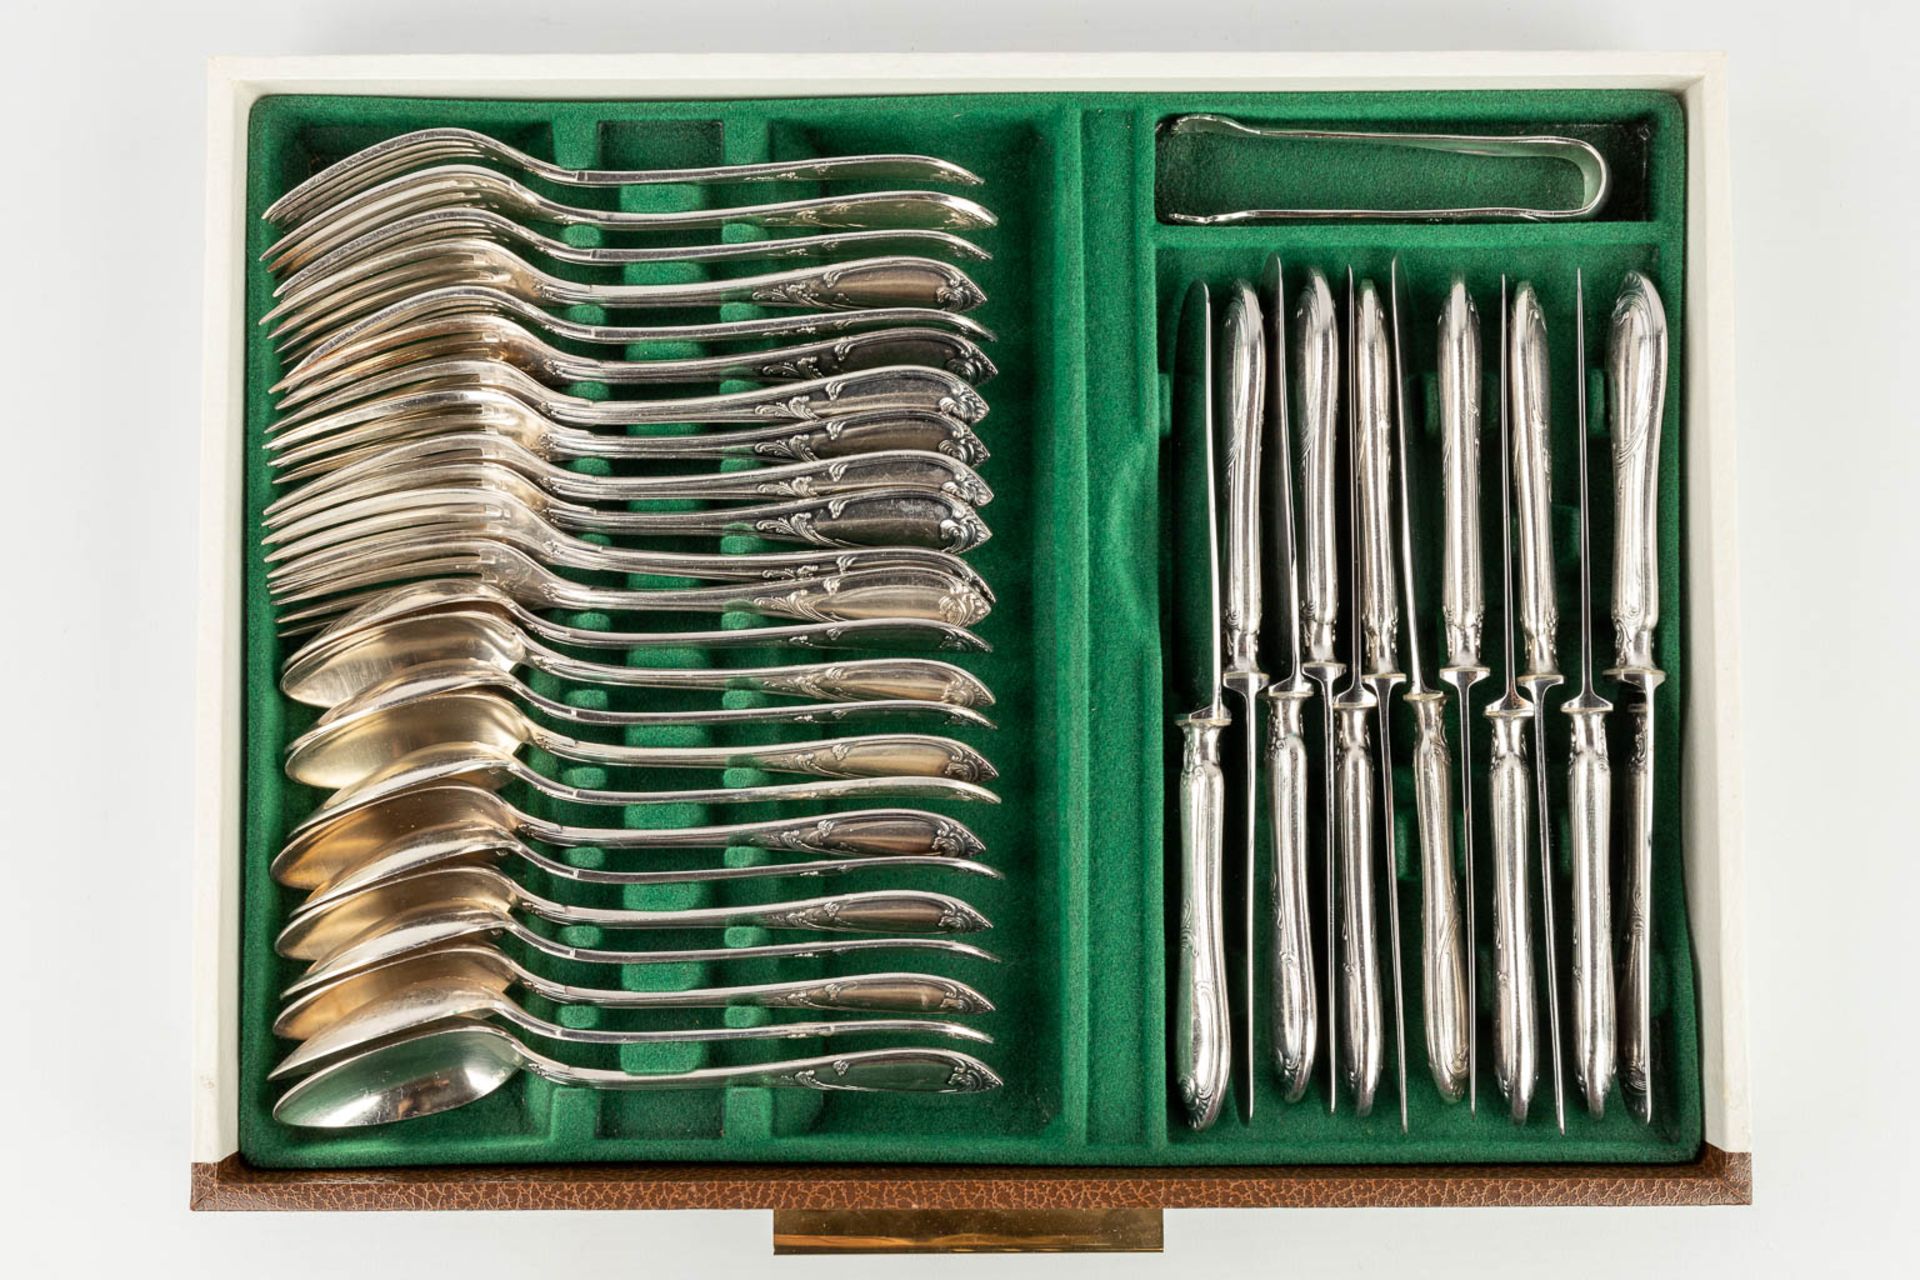 B. Wiskemann, Bruxelles, a silver-plated cutlery set, Louis XV style. (L: 30 x W: 39 x H: 22 cm) - Image 23 of 24